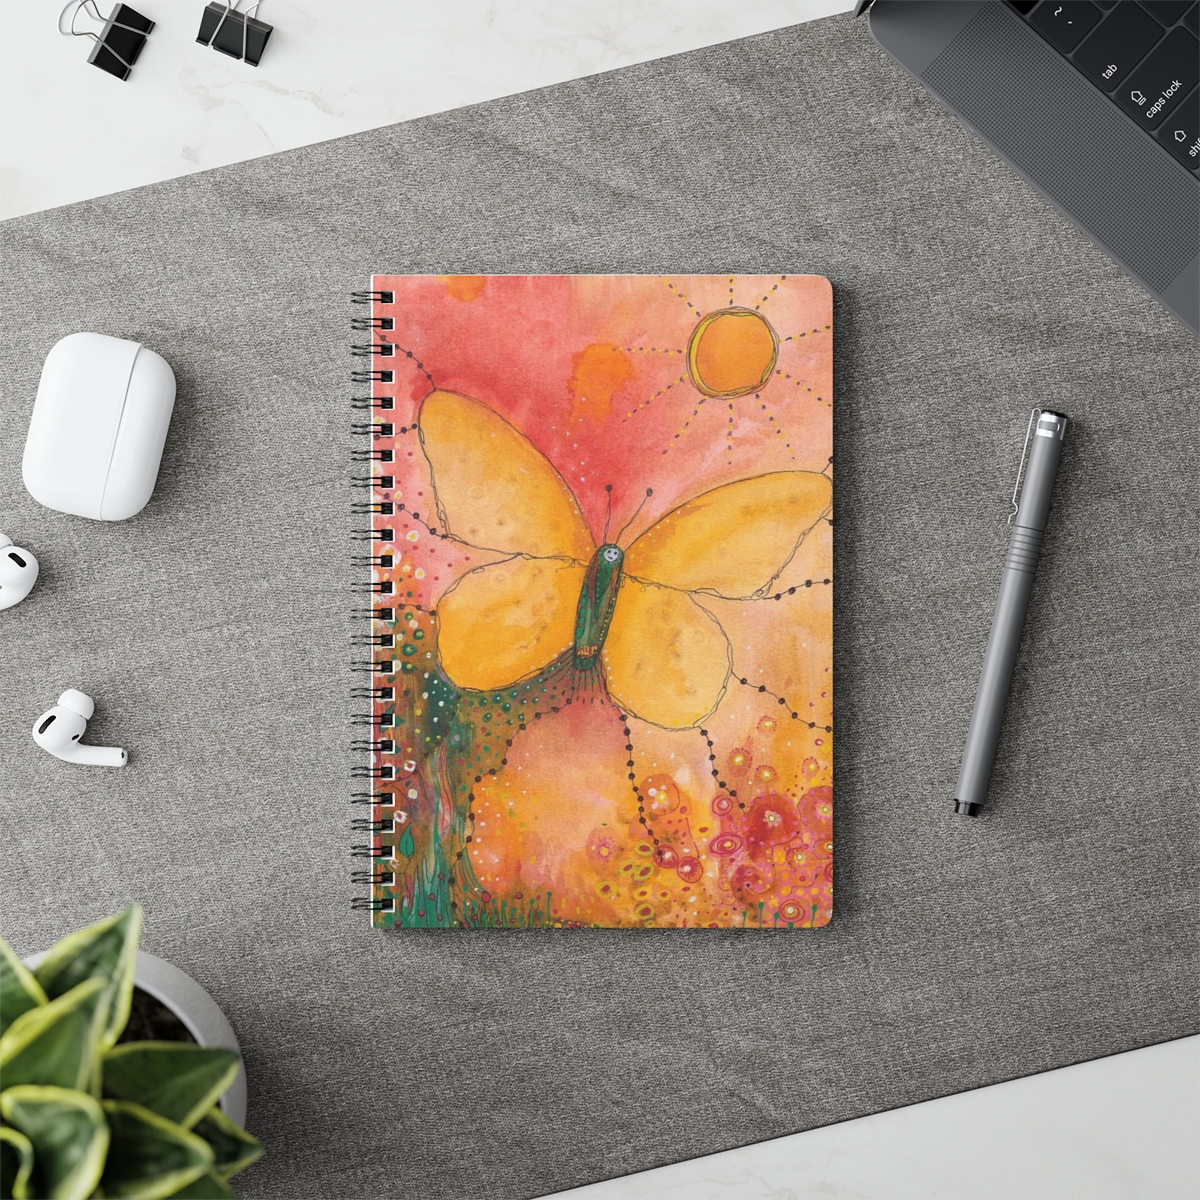 Butter fly notebook in context. Image of butterfly uses soft tones of yellows and oranges and the butterfly is rising to greet the sun